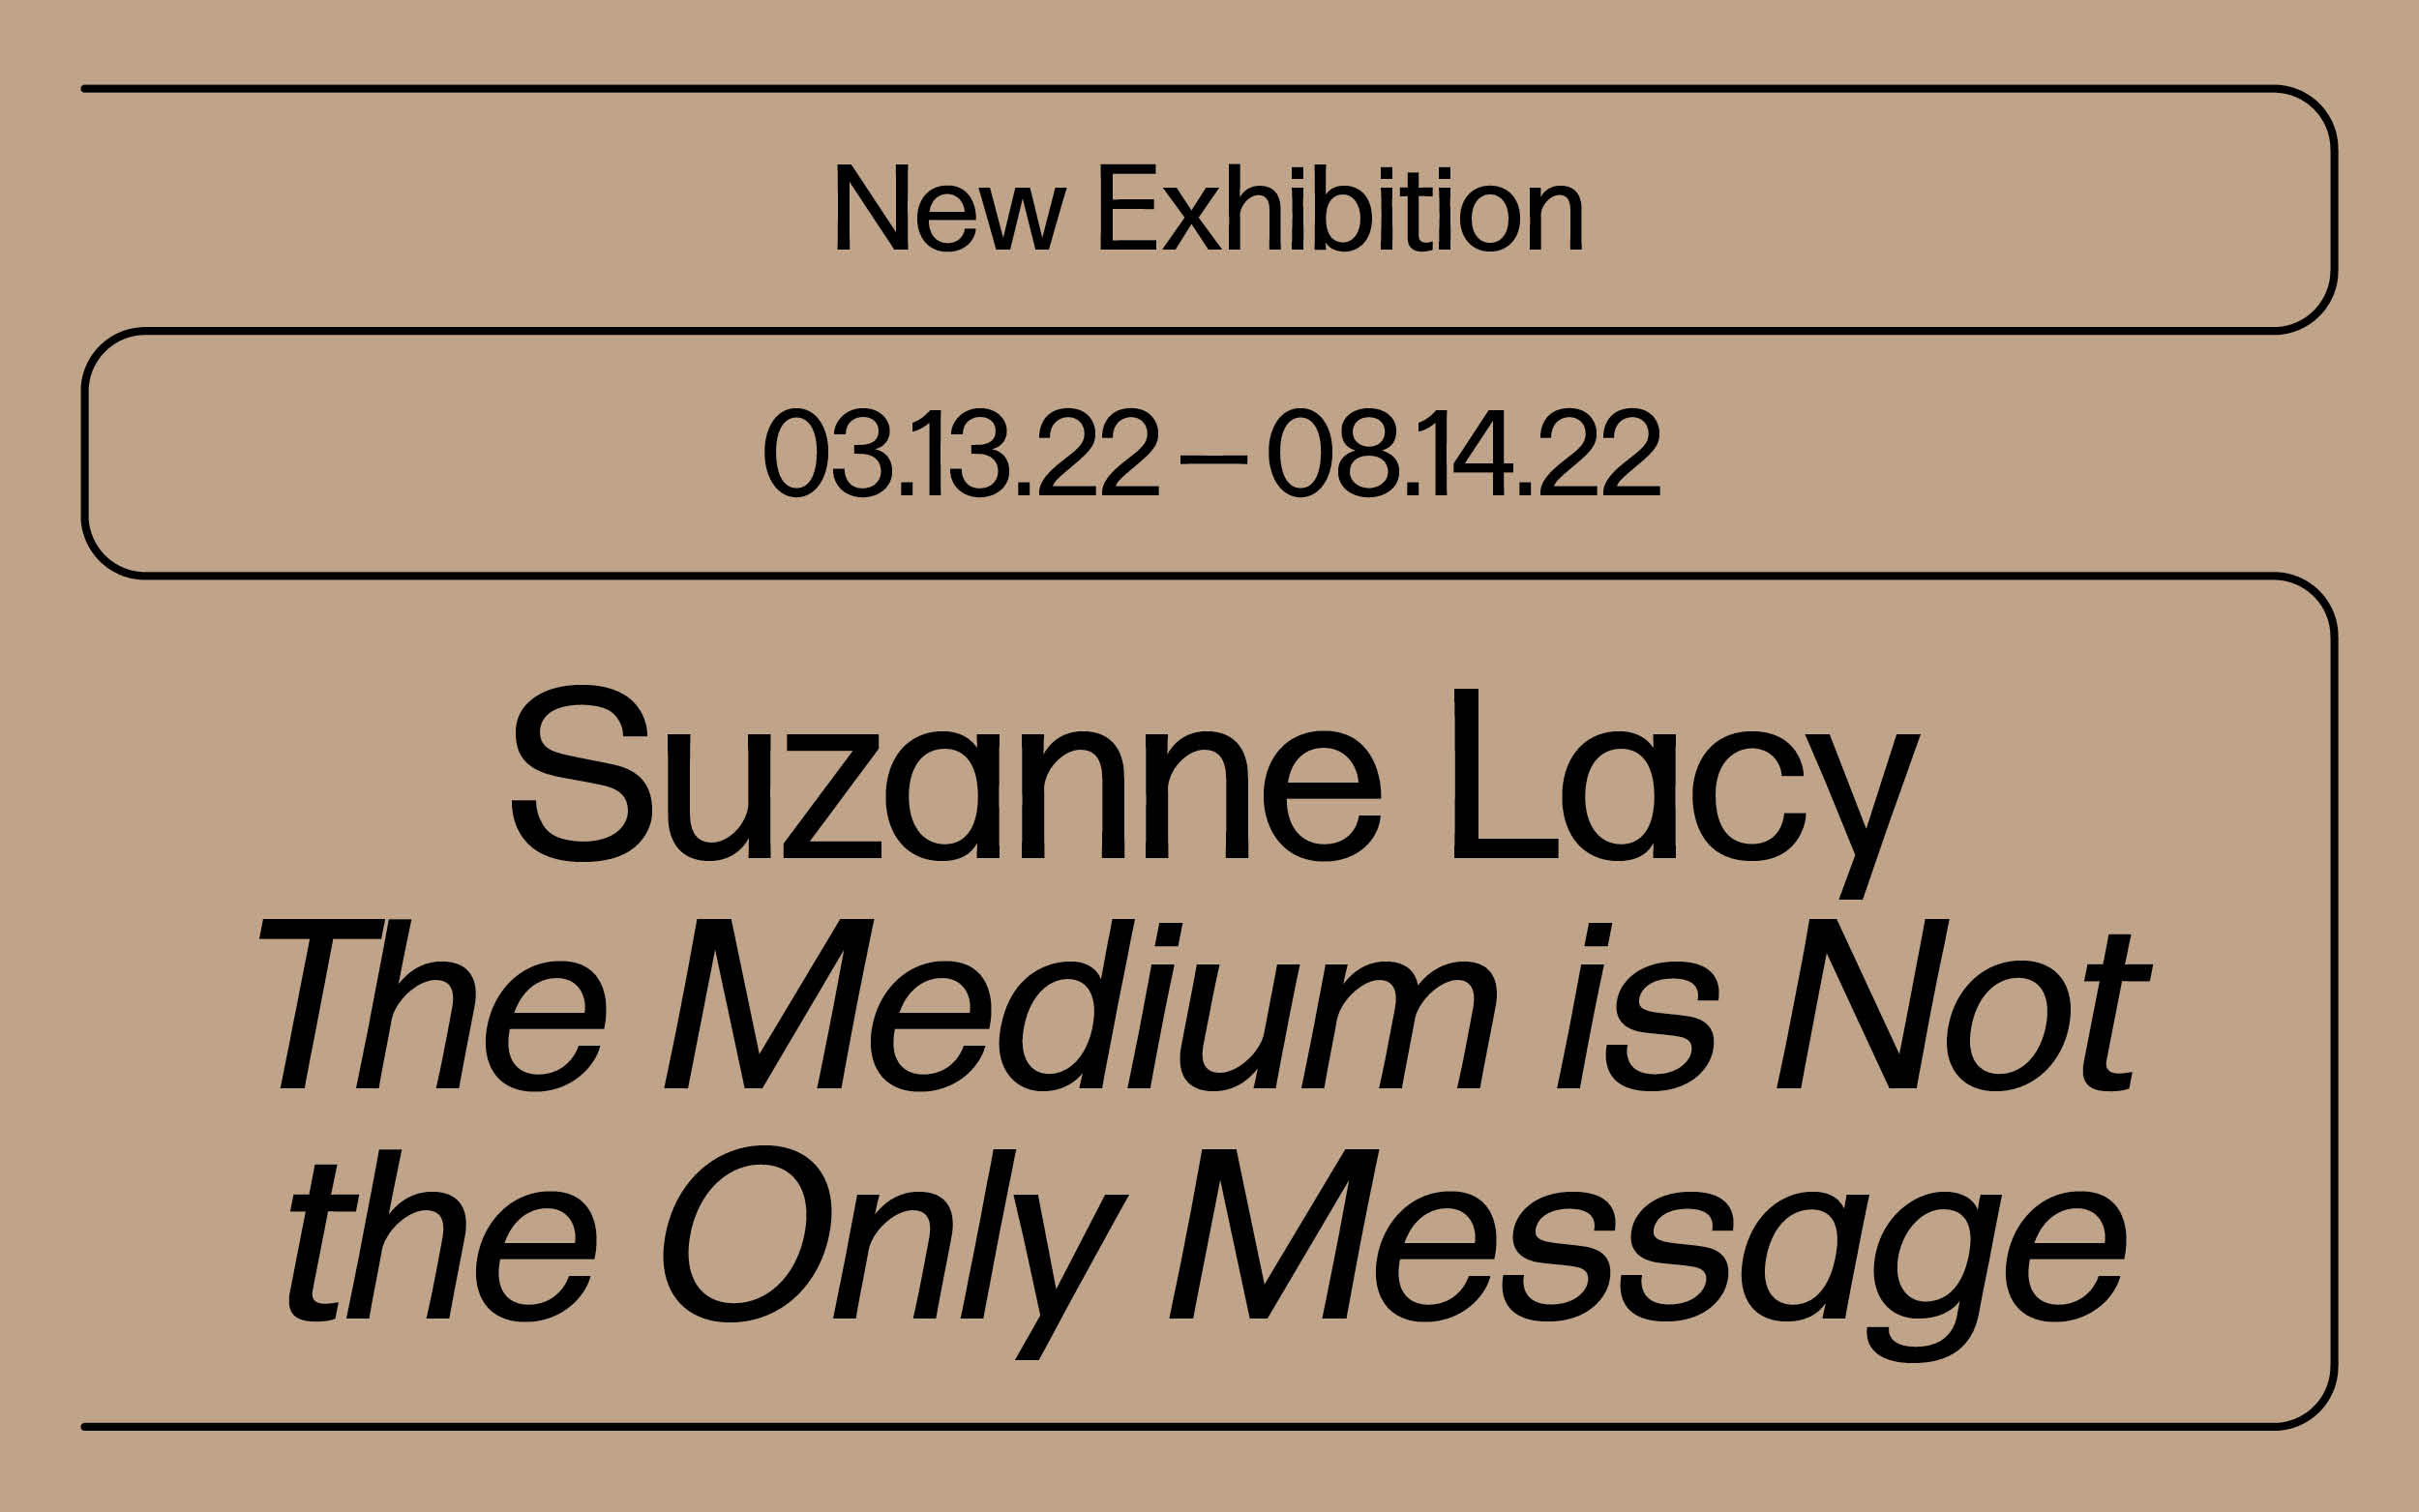 Black text on beige background that reads "New Exhibition, 03.13.22 - 08.14.22, Suzanne Lacy "The Medium is Not the Only Message"